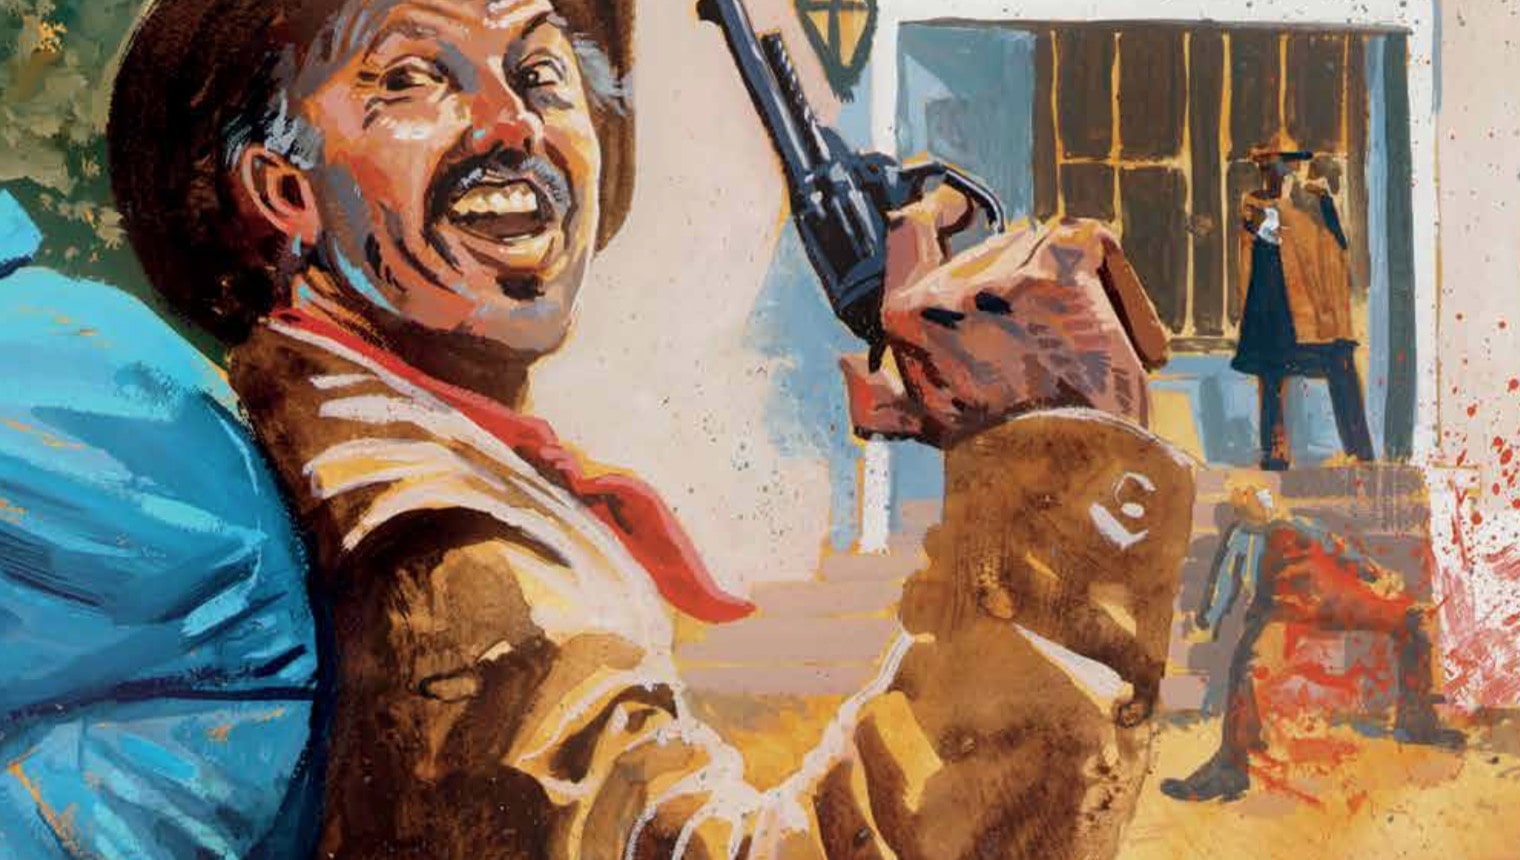 ‘The Enfield Gang Massacre’ #2 features an exceptional shoot-out